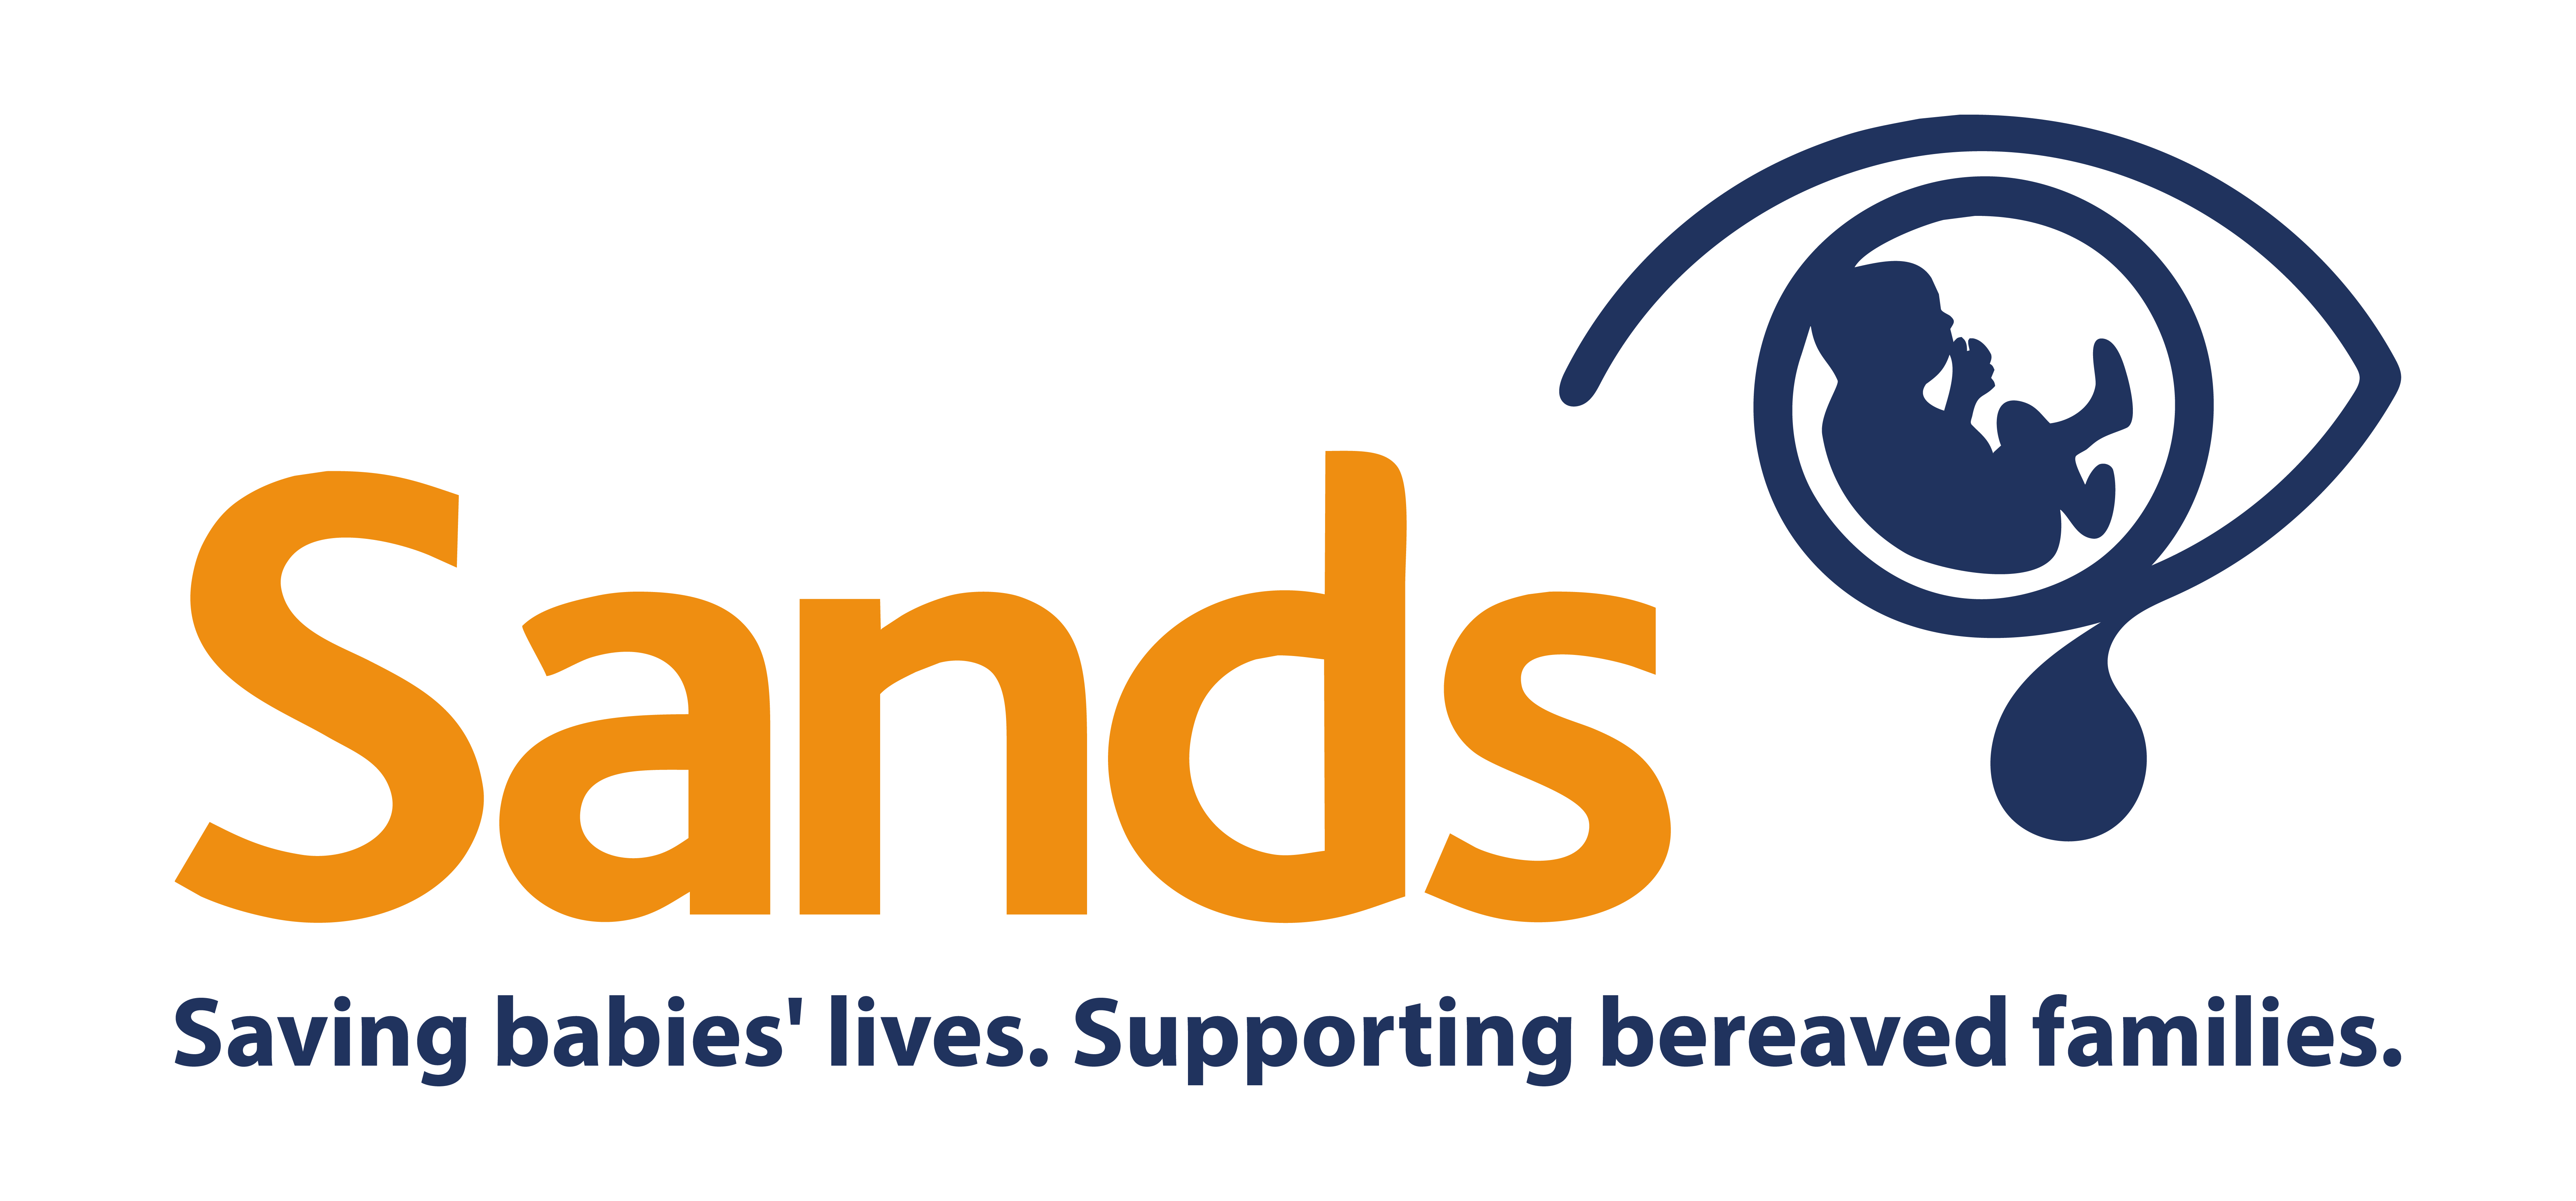 Sands | Saving babies' lives. Supporting bereaved families.